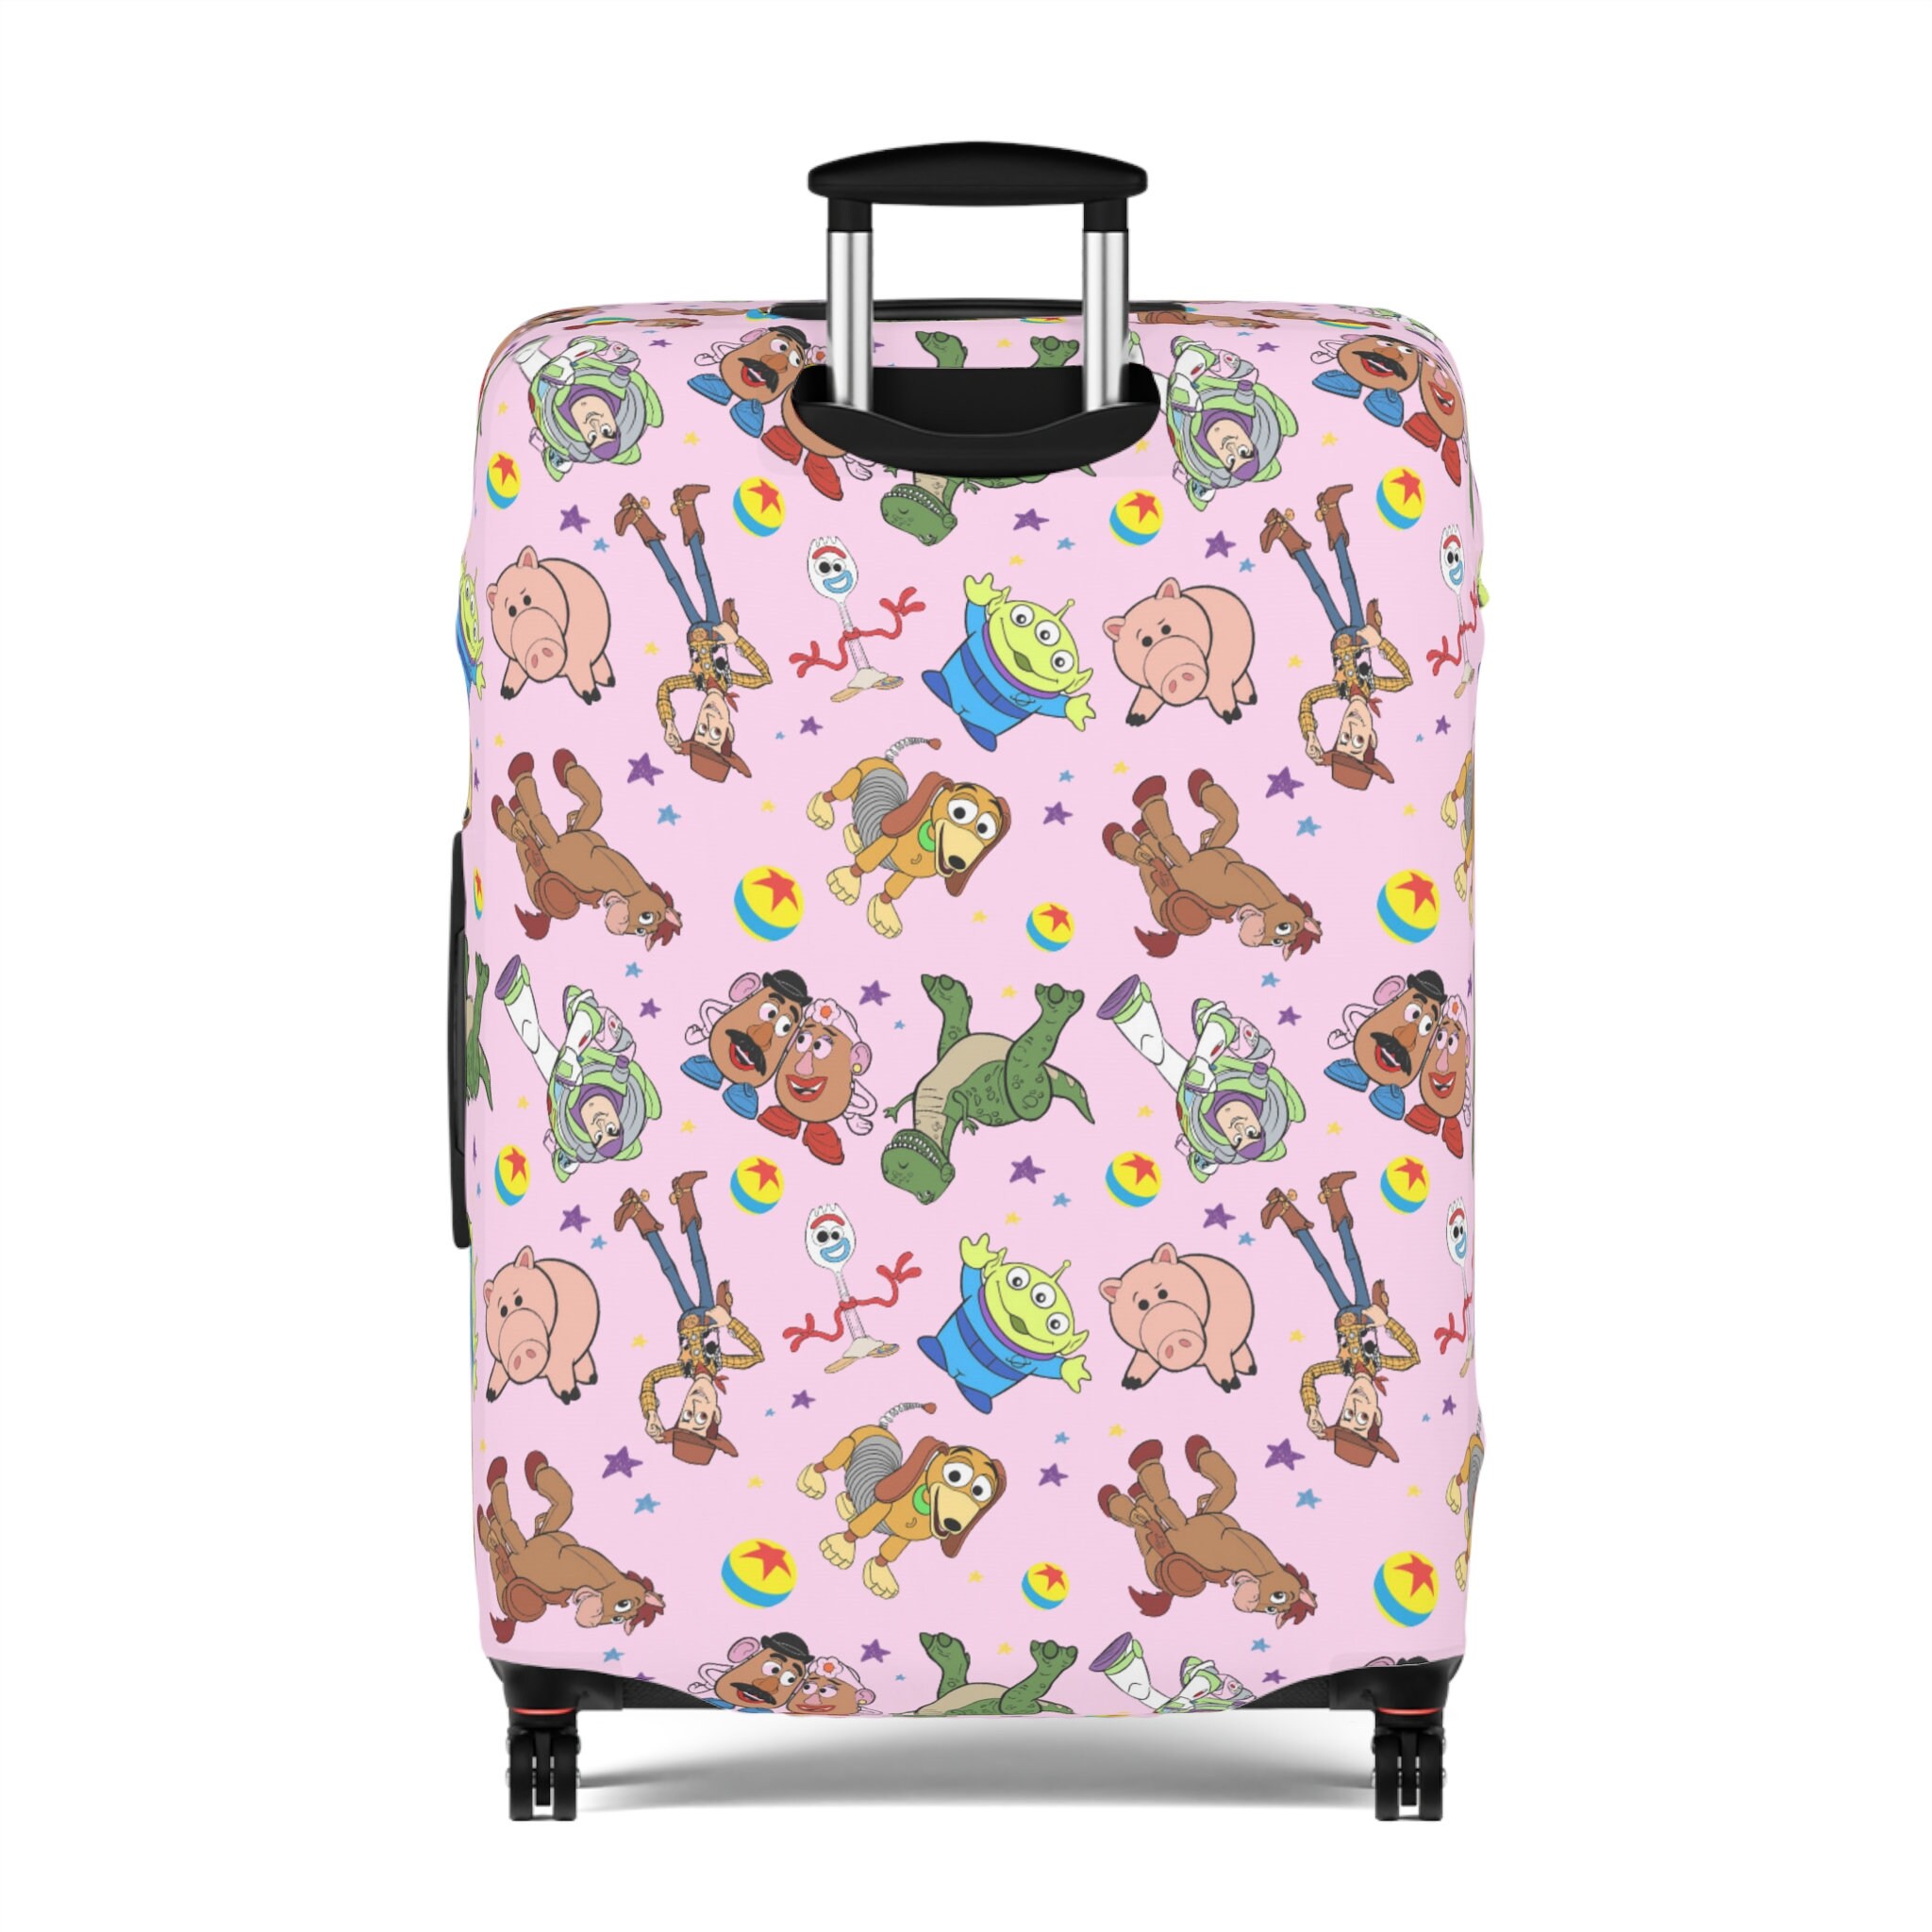 Kids Disney Luggage cover, Disney cover, Toy story Luggage cover